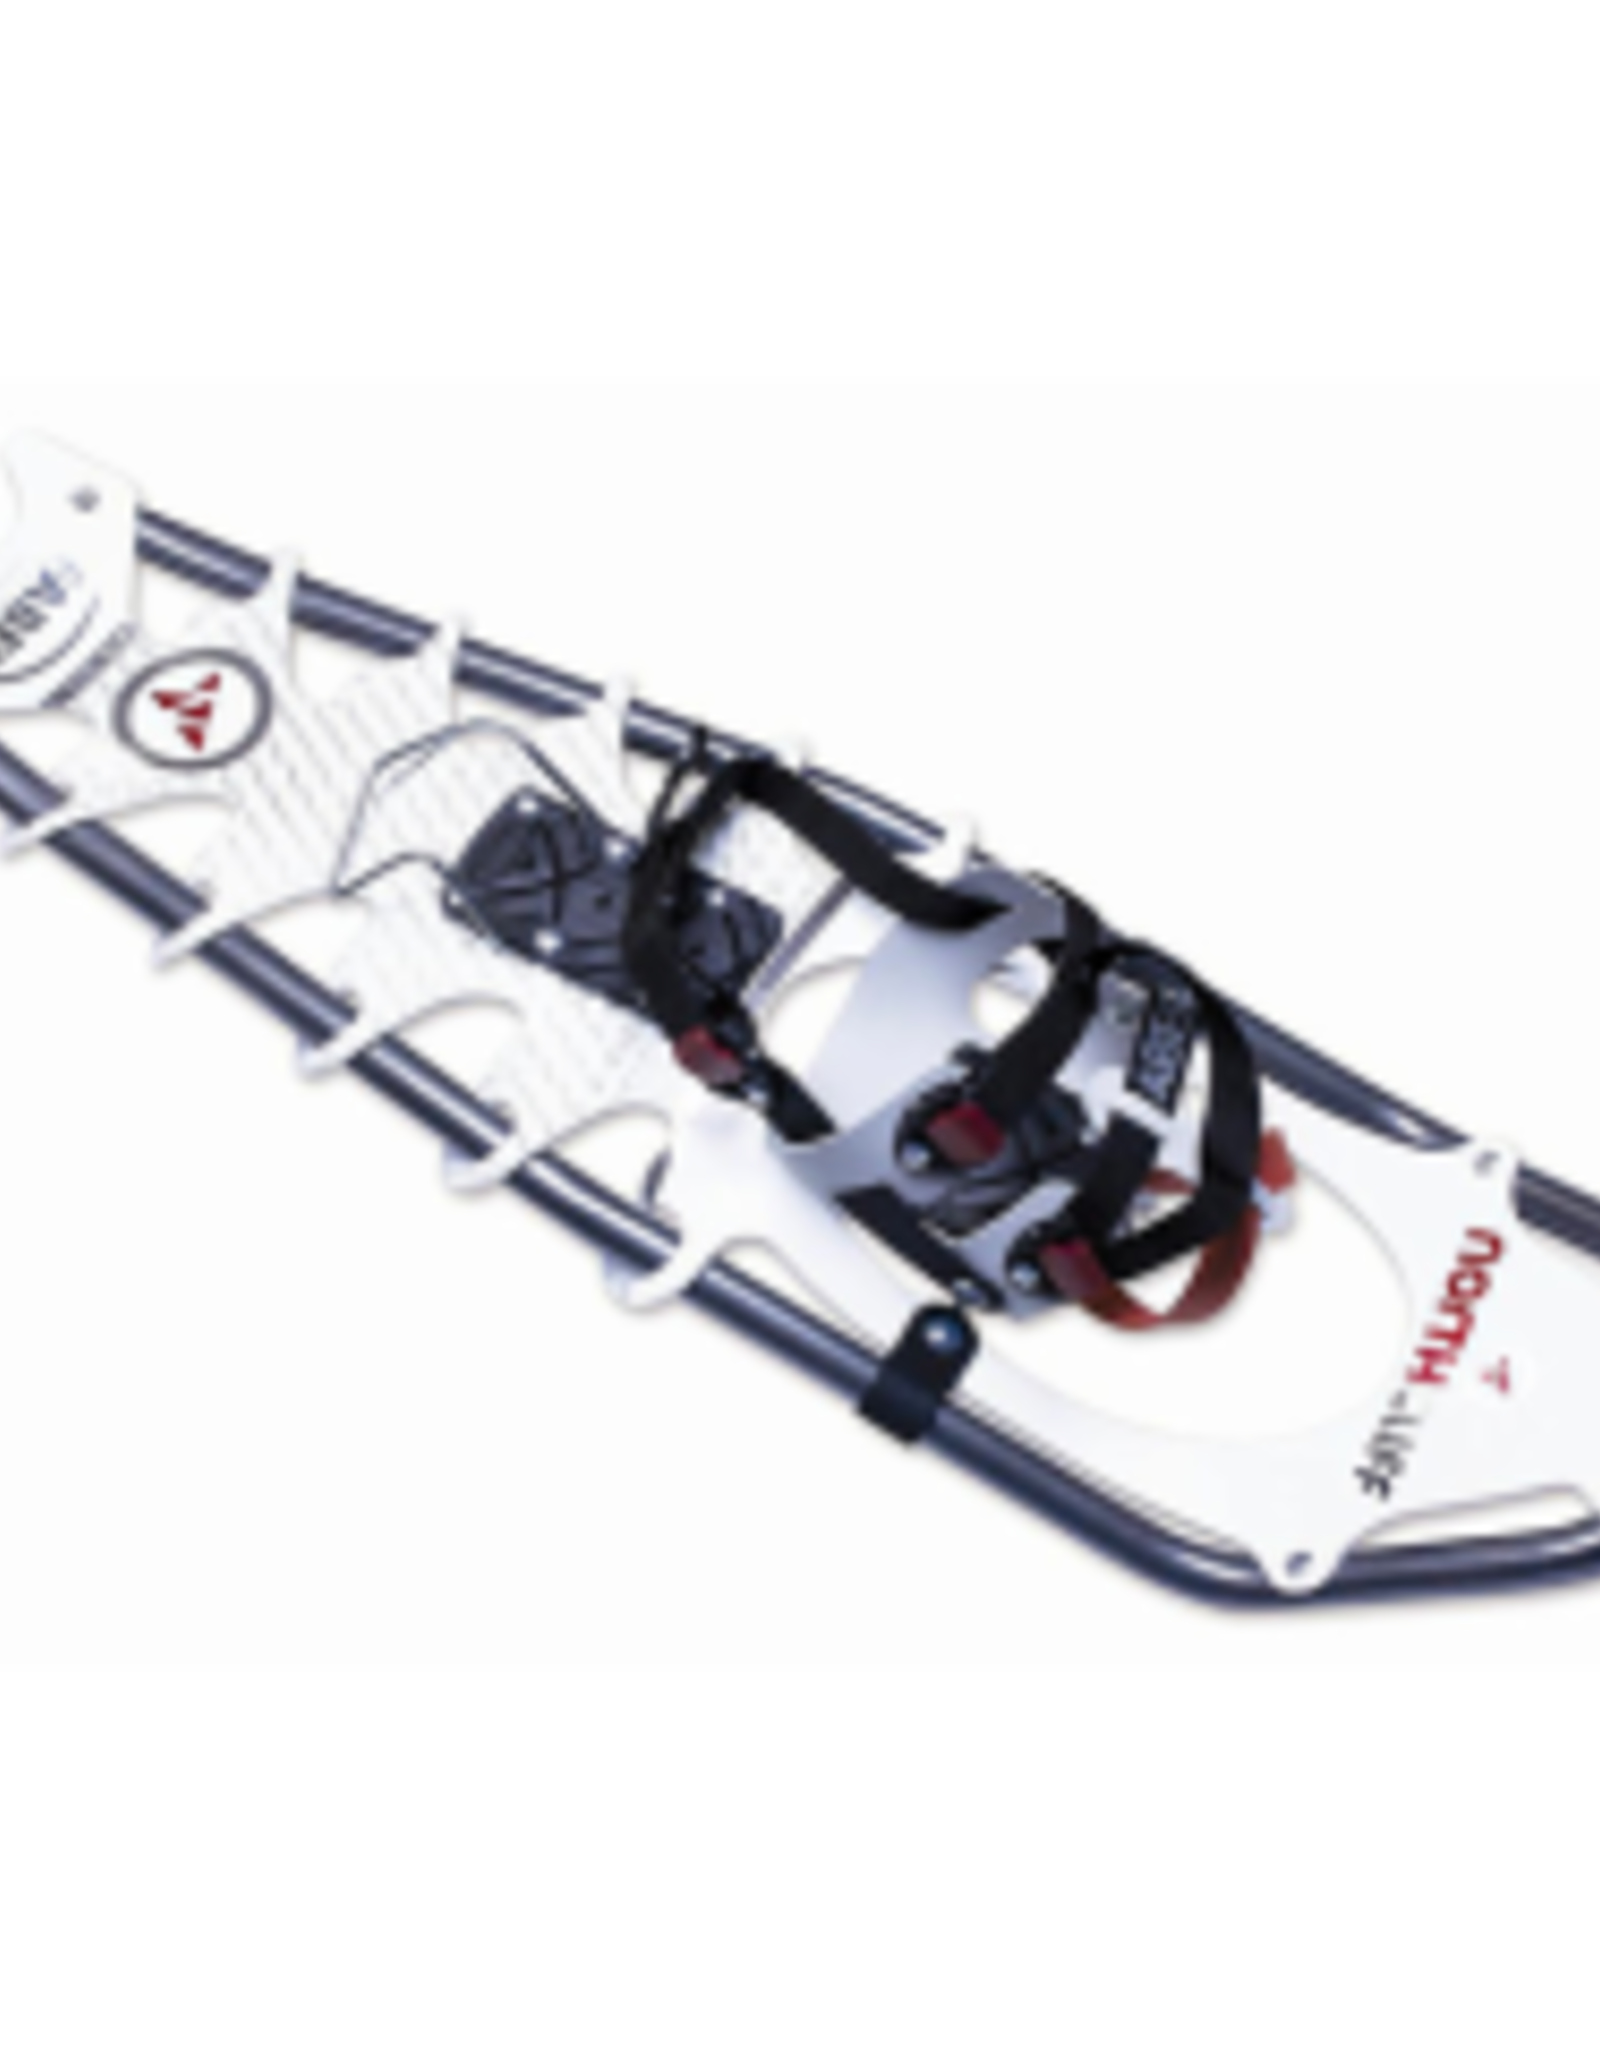 Faber Raquettes North Cliff 9x29IN Snowshoes (FA-NC929)